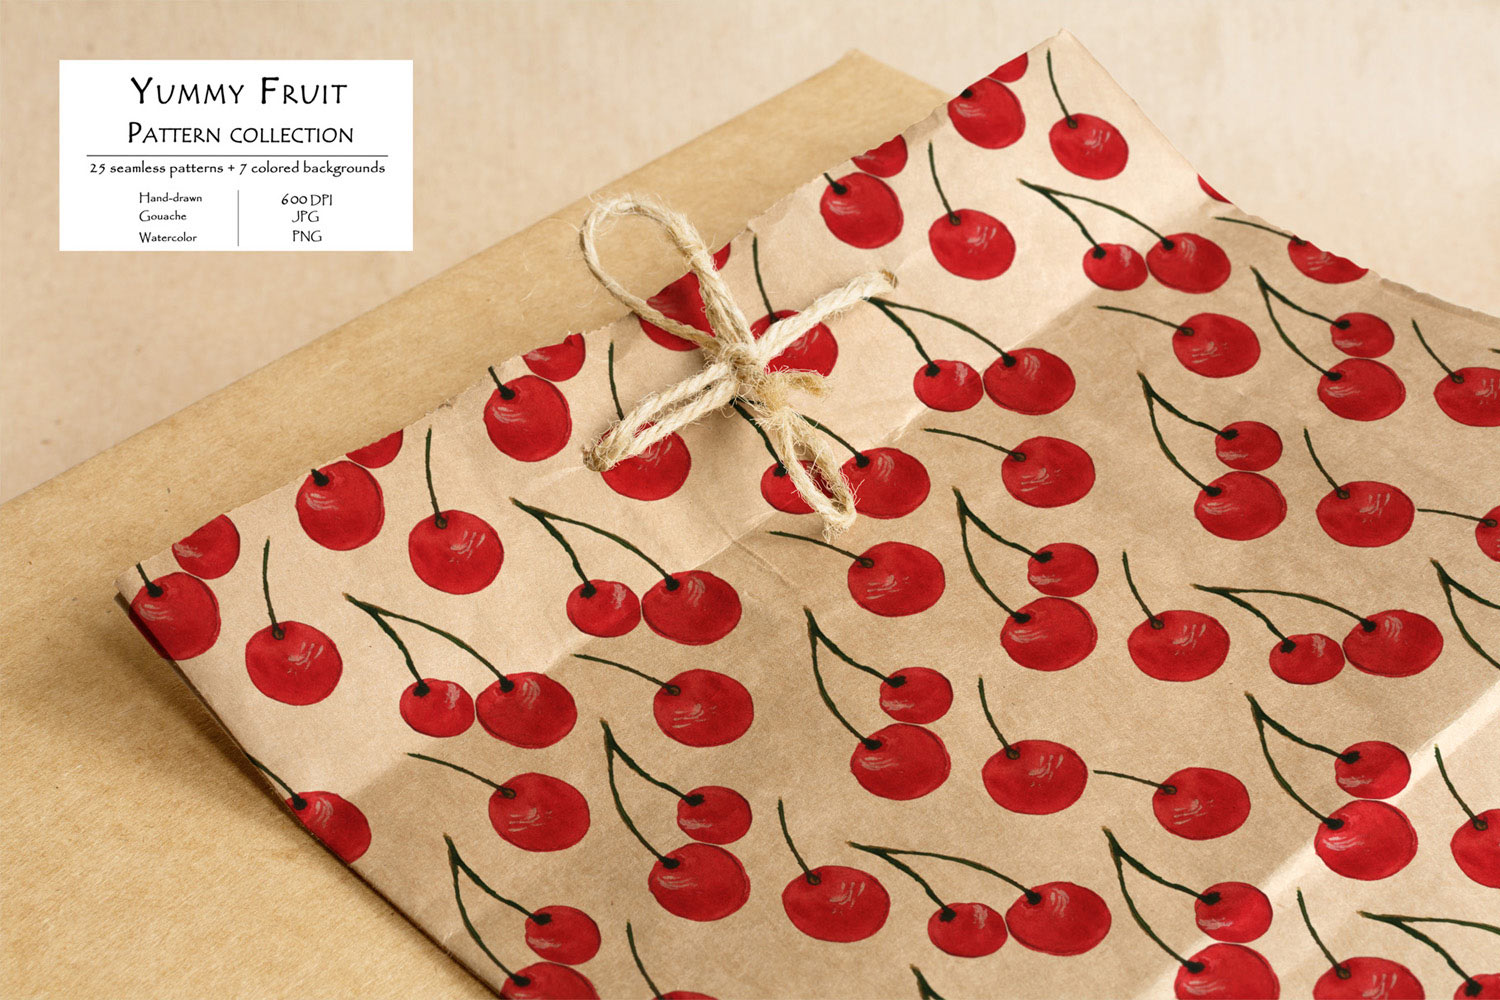 Yummy Fruit Pattern Collection With 25 Seamless Patterns And 7 Backgrounds Paper Bag Print Example.